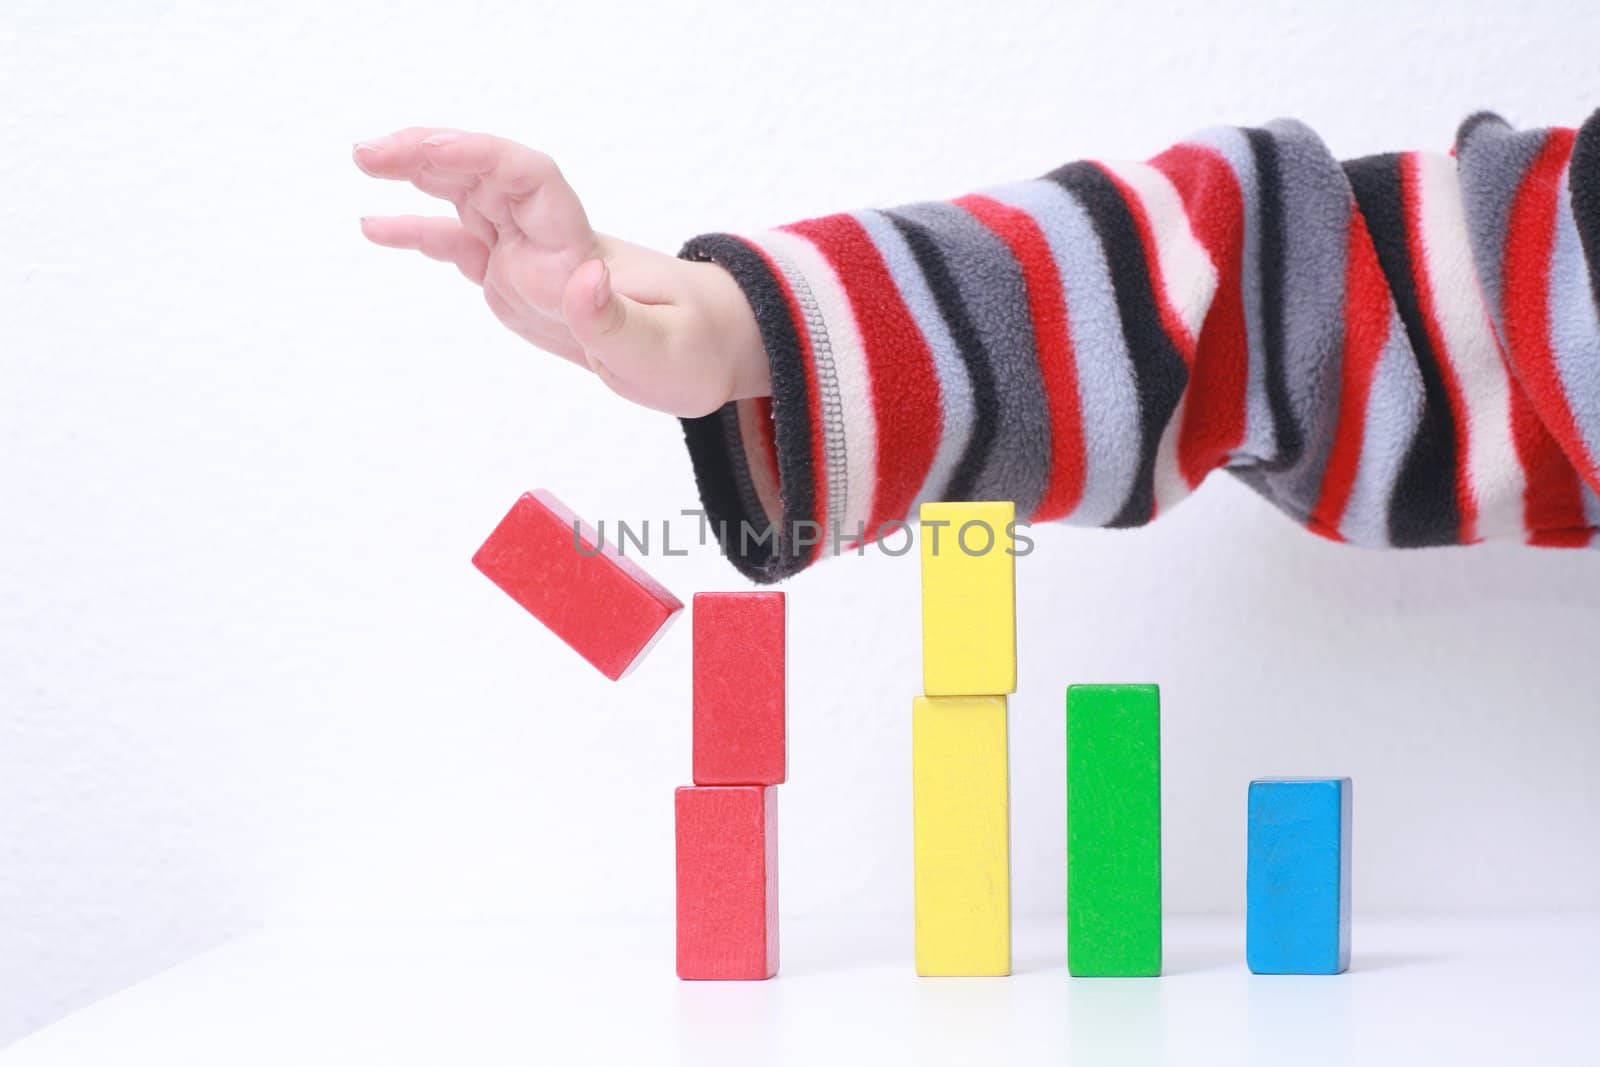 sales charts symbolized by wood toys............